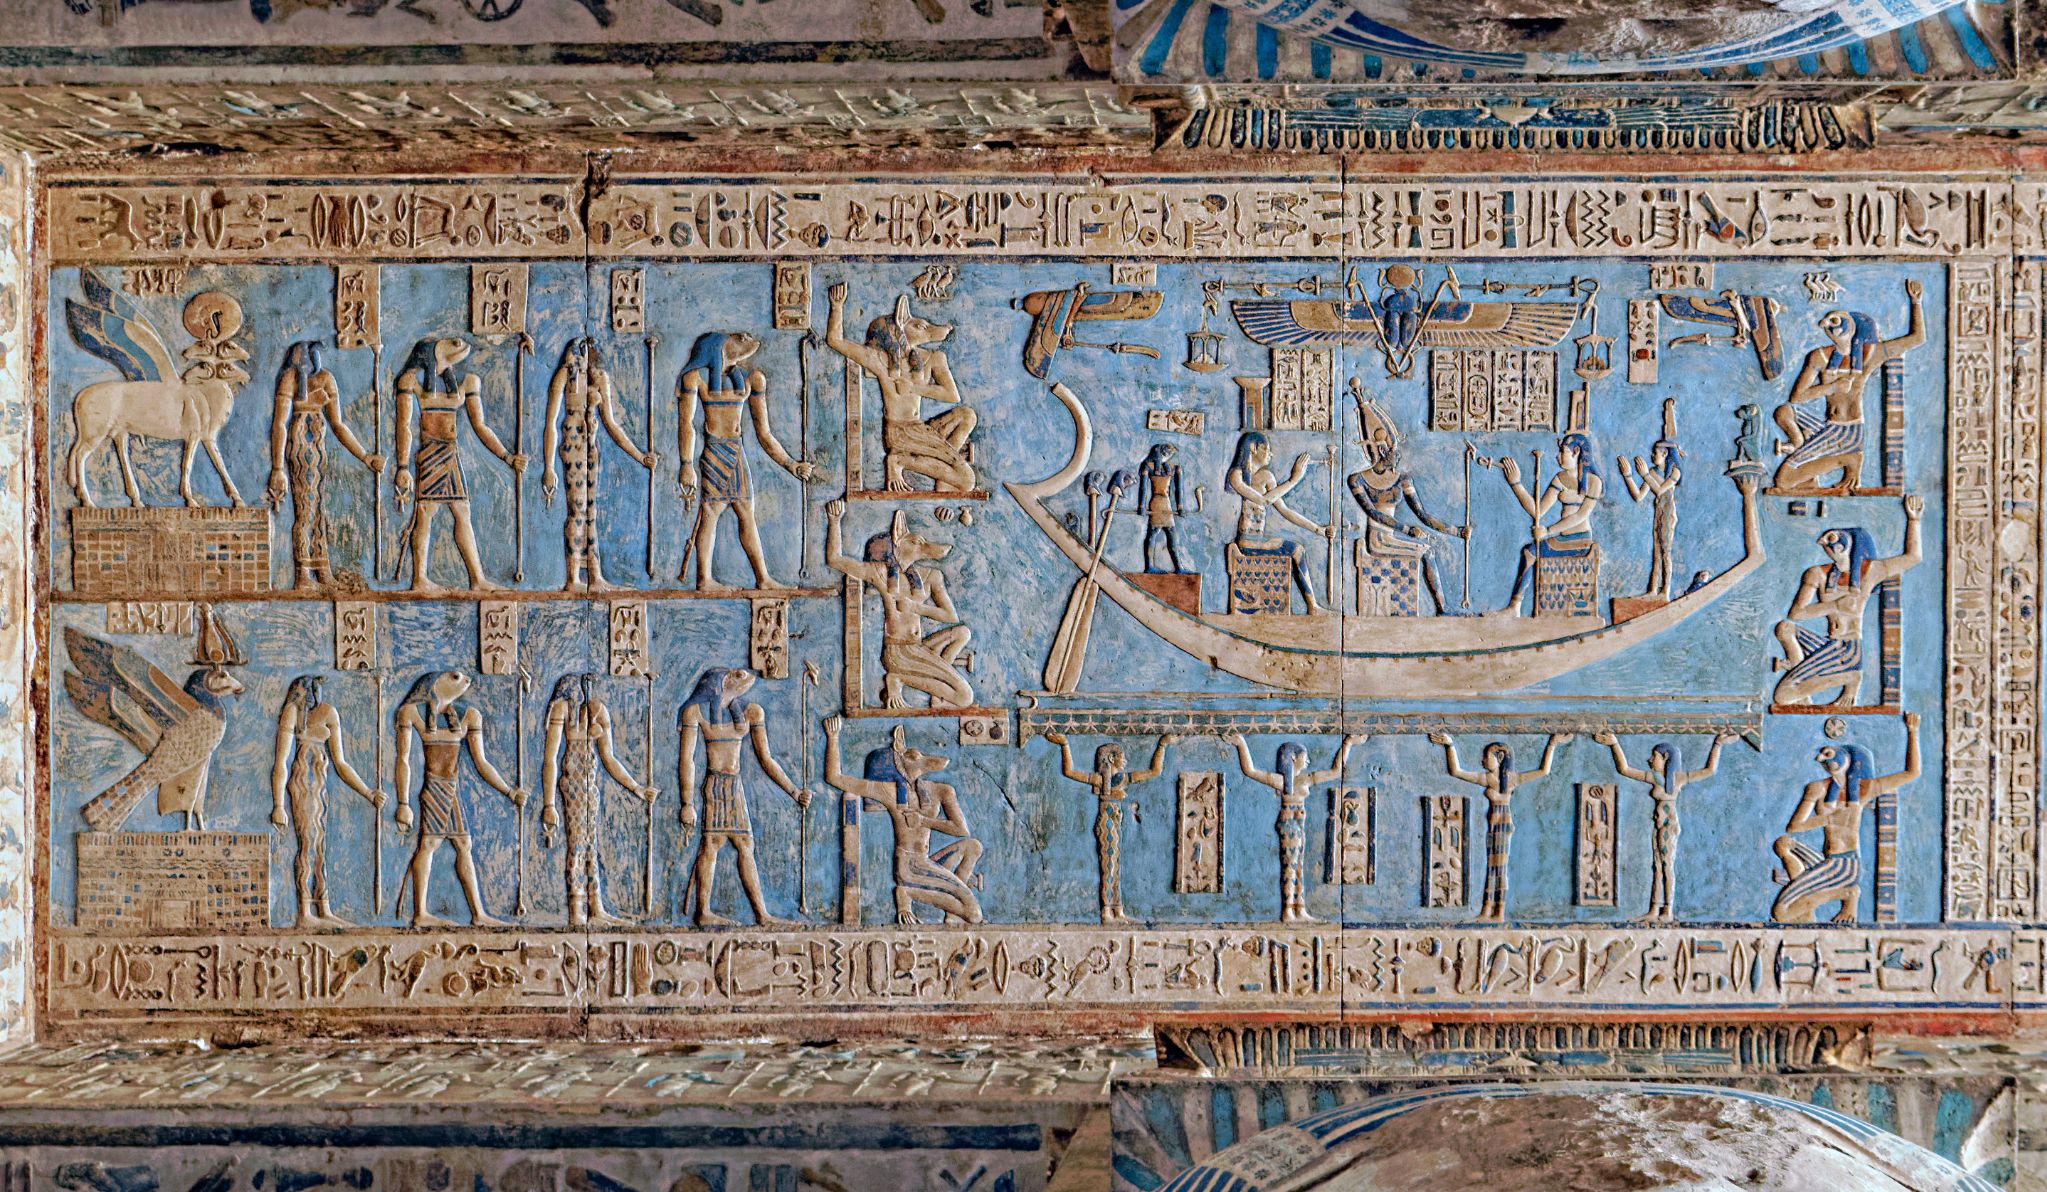 Dream chambers, like this one at the Dendera temple in Egypt's Qena Governate, were once used to help find meaning to dreams (Creative Commons)